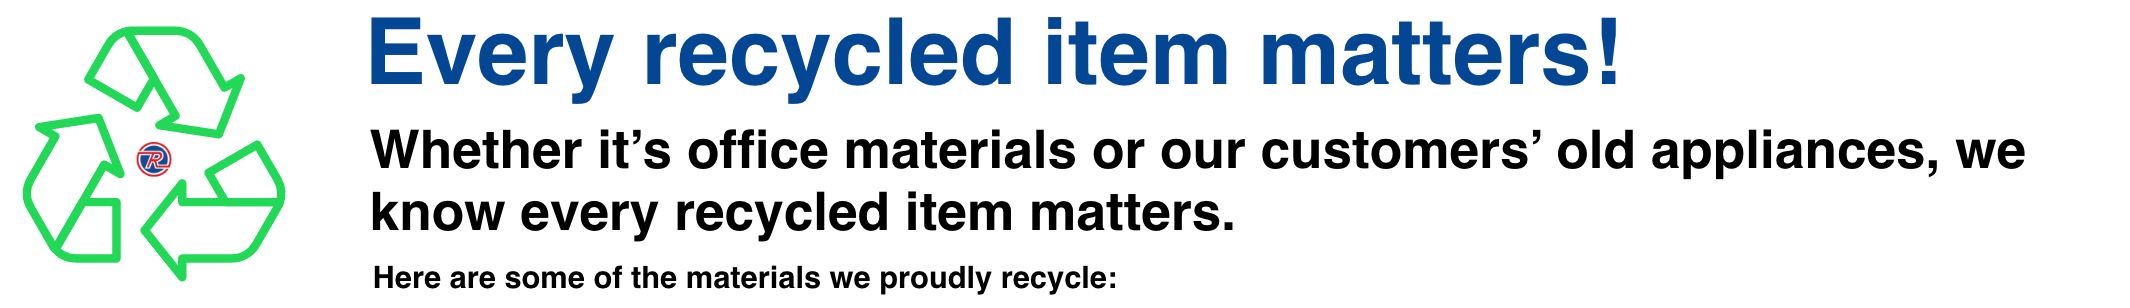 Every recycled item matters! Whether it's office materials or our customer's old appliances, we know every recycled item mattters.